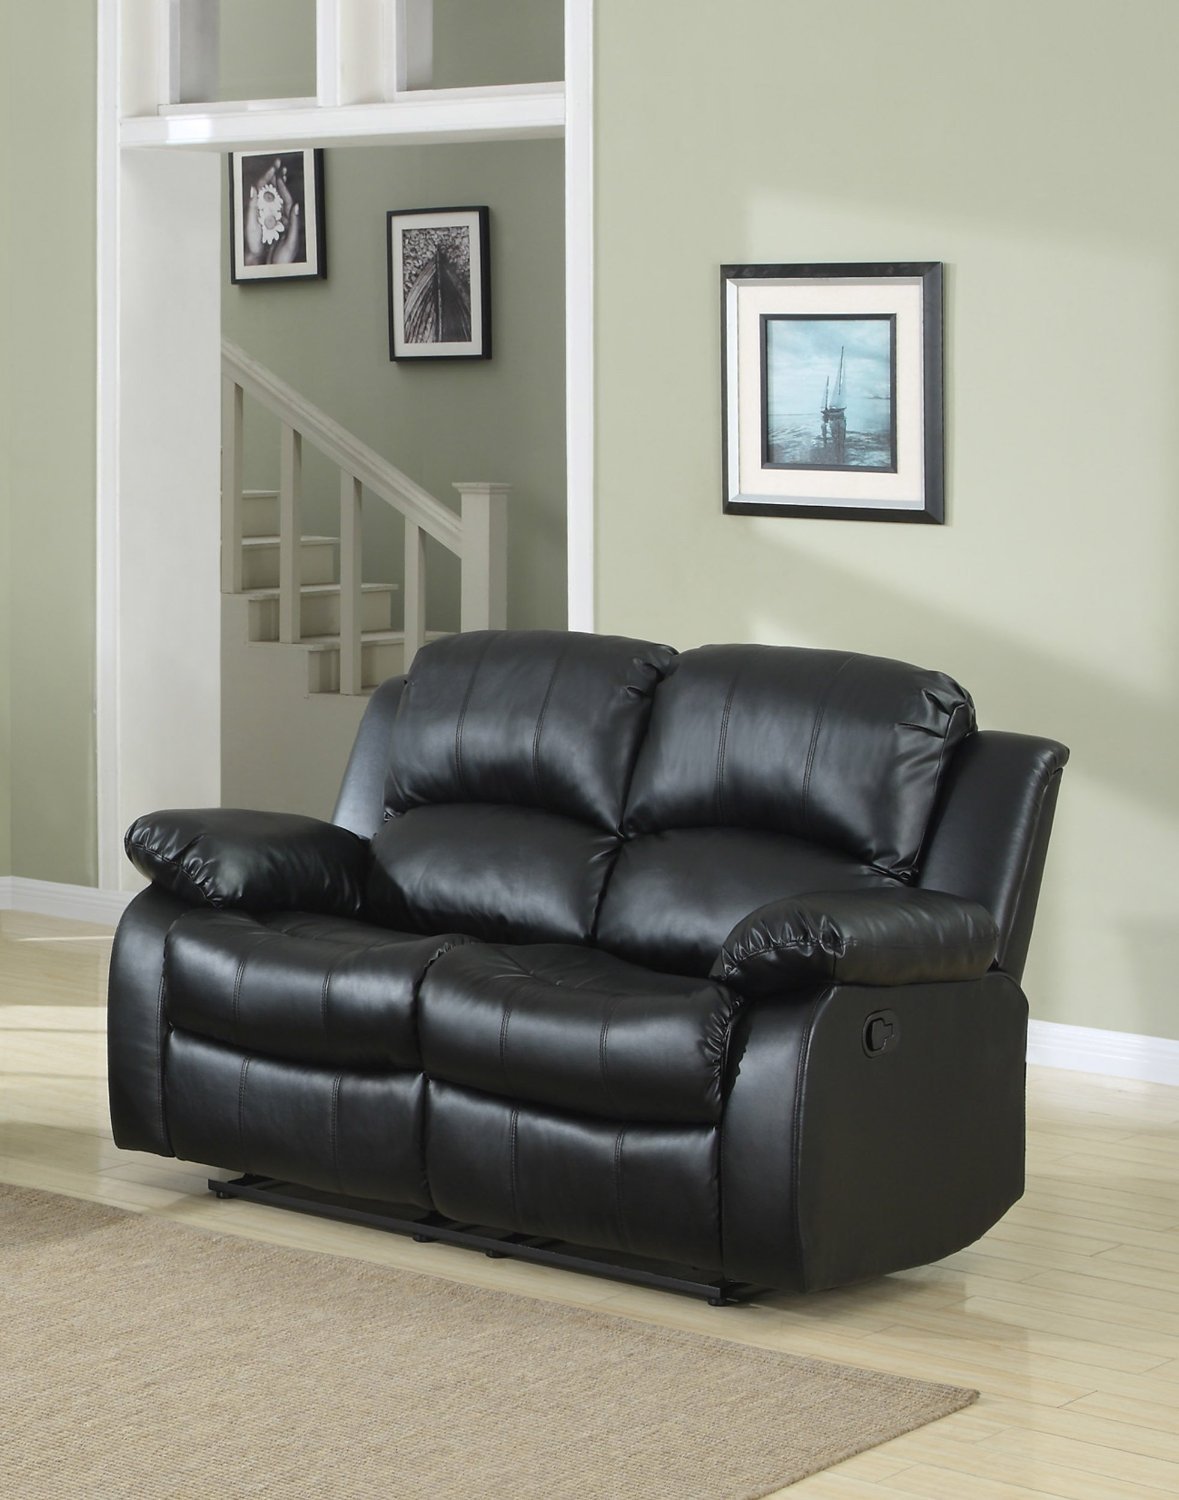 Double Reclining Loveseat Bonded Leather Recliner Living Room Furniture  Black